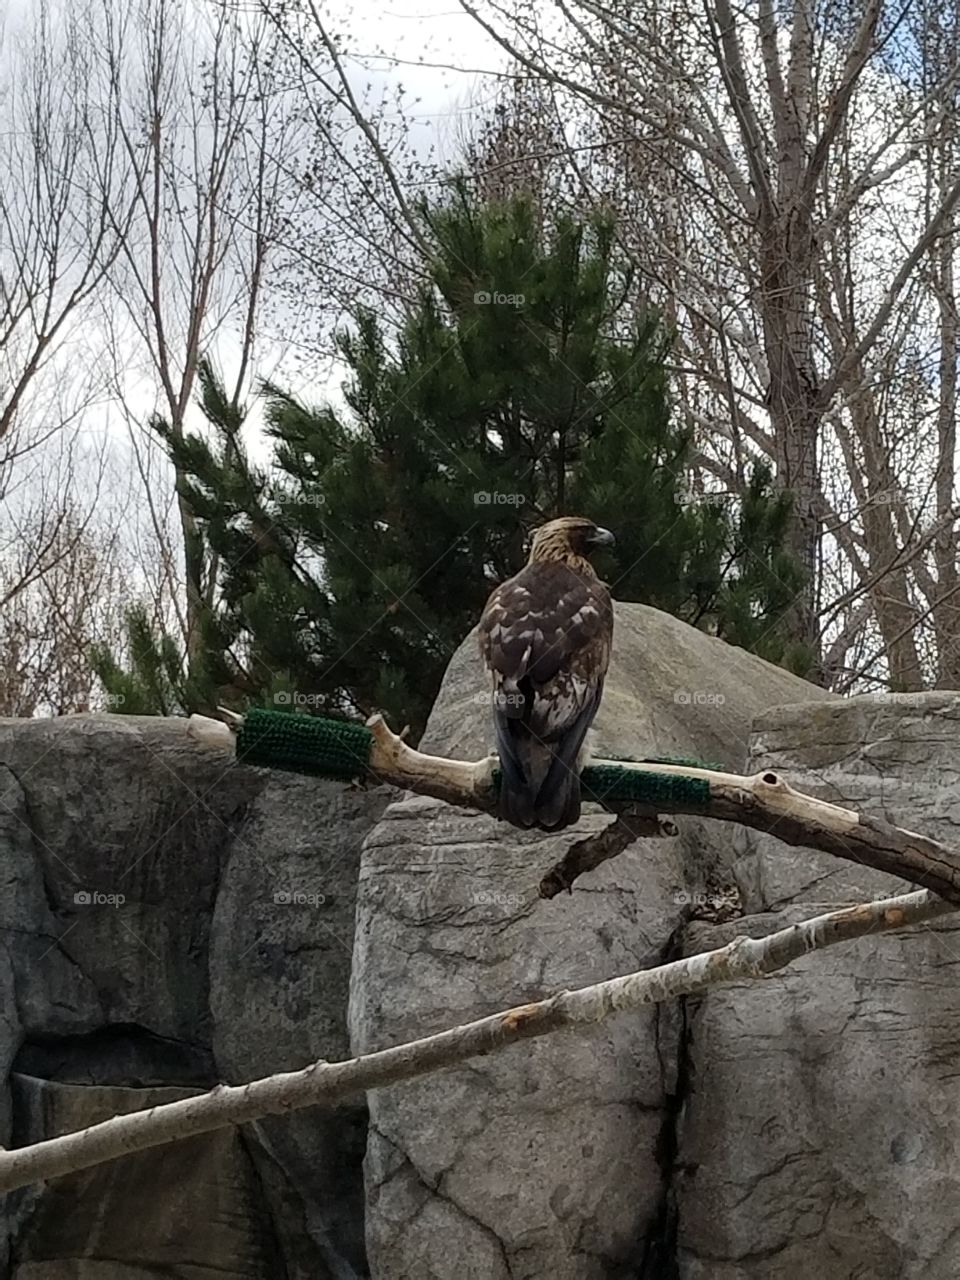 golden eagle perched on a branch and scouting out the opportunities